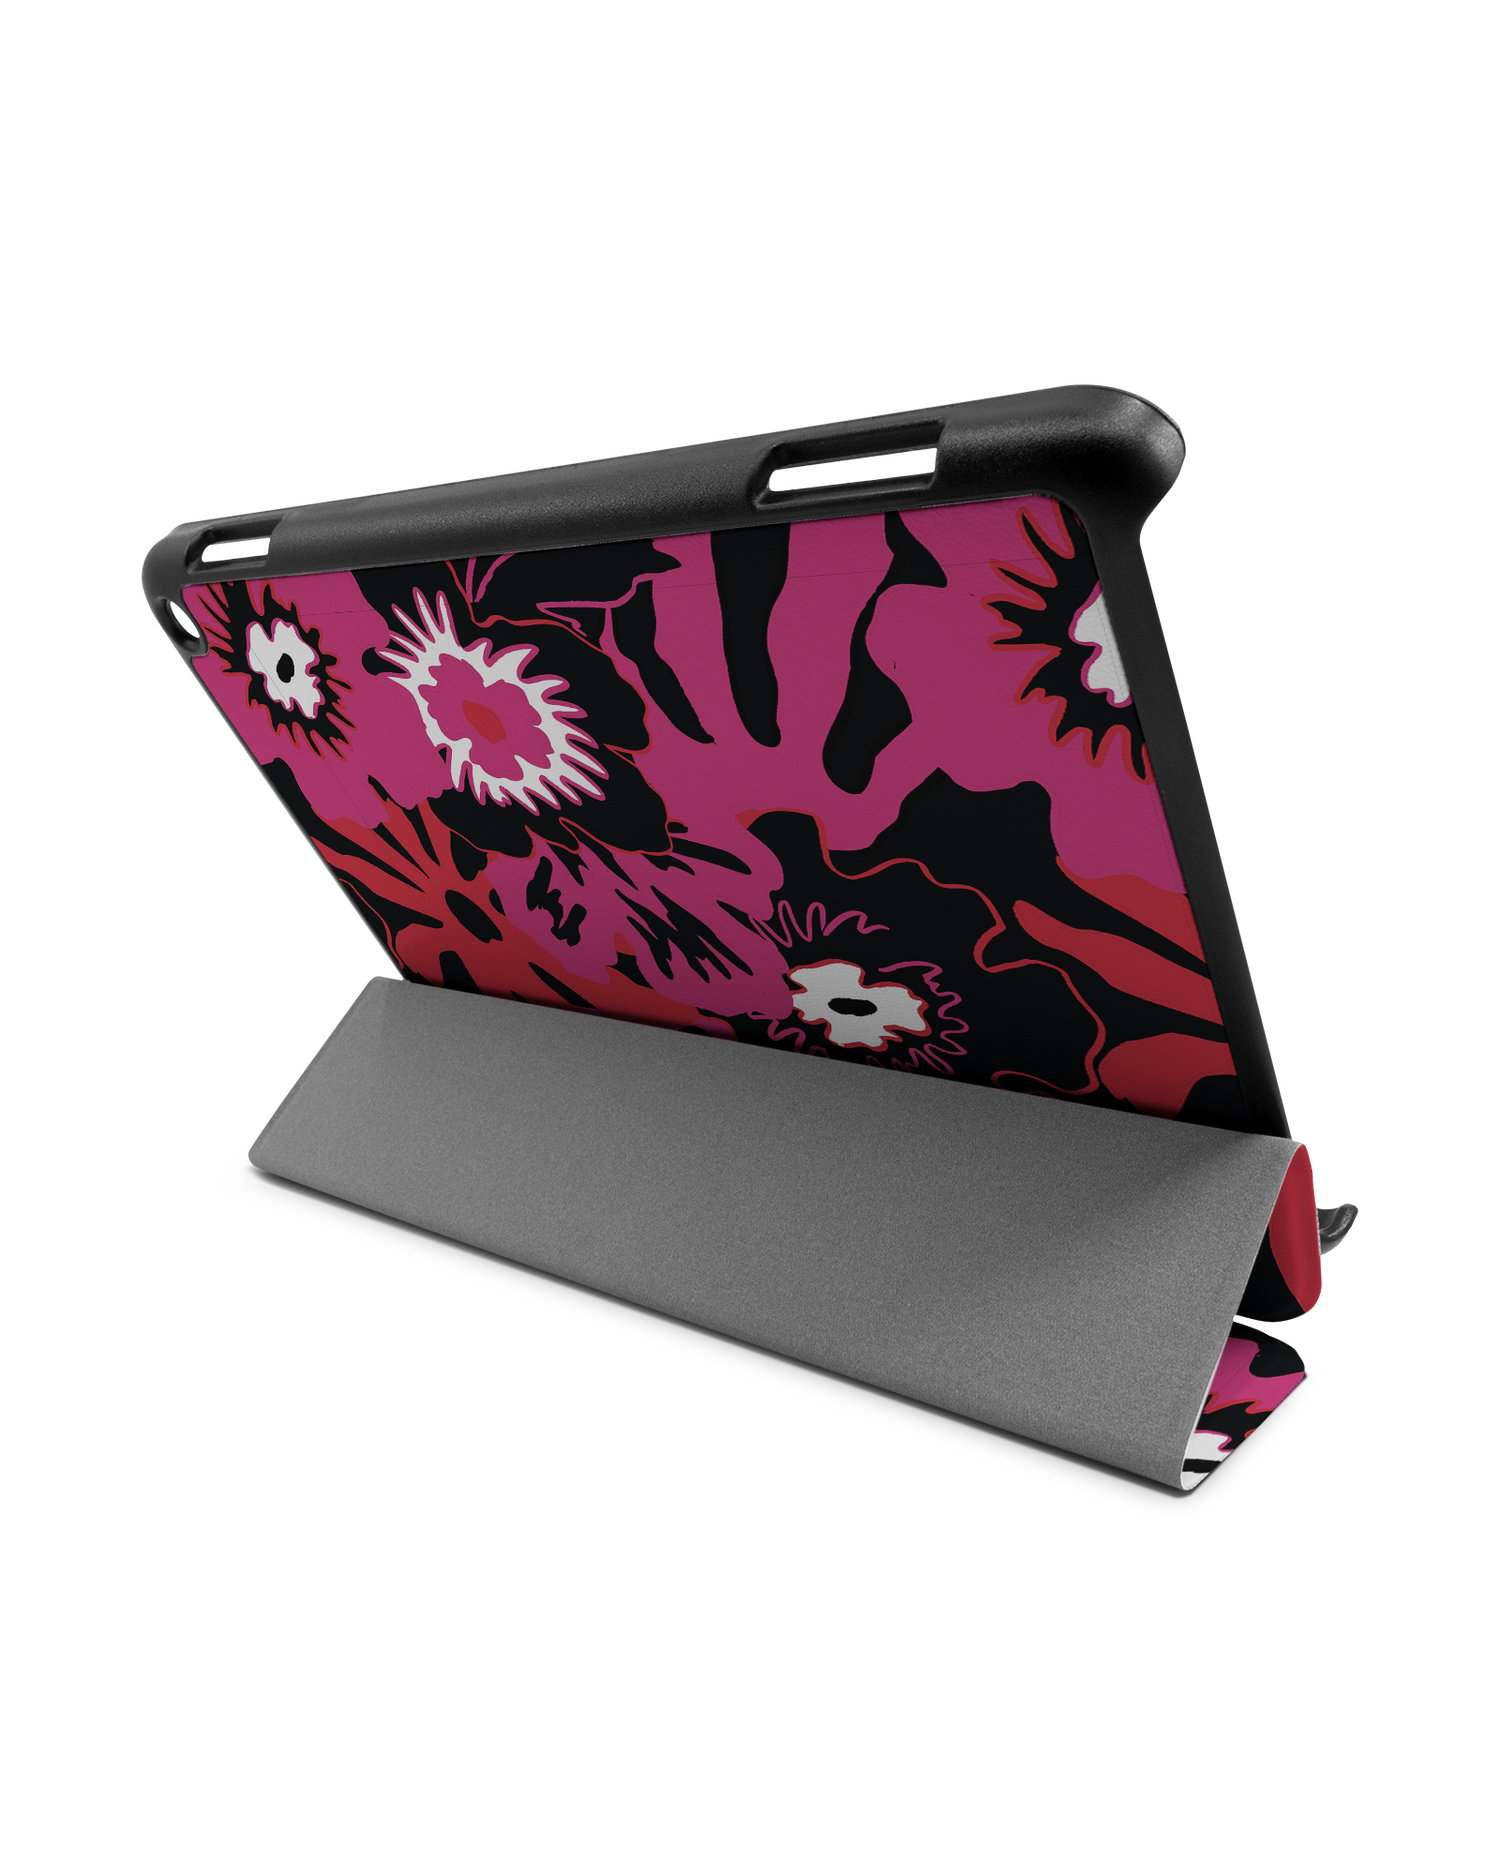 Flower Works Tablet Smart Case for Amazon Fire HD 8 (2022), Amazon Fire HD 8 Plus (2022), Amazon Fire HD 8 (2020), Amazon Fire HD 8 Plus (2020): Used as Stand